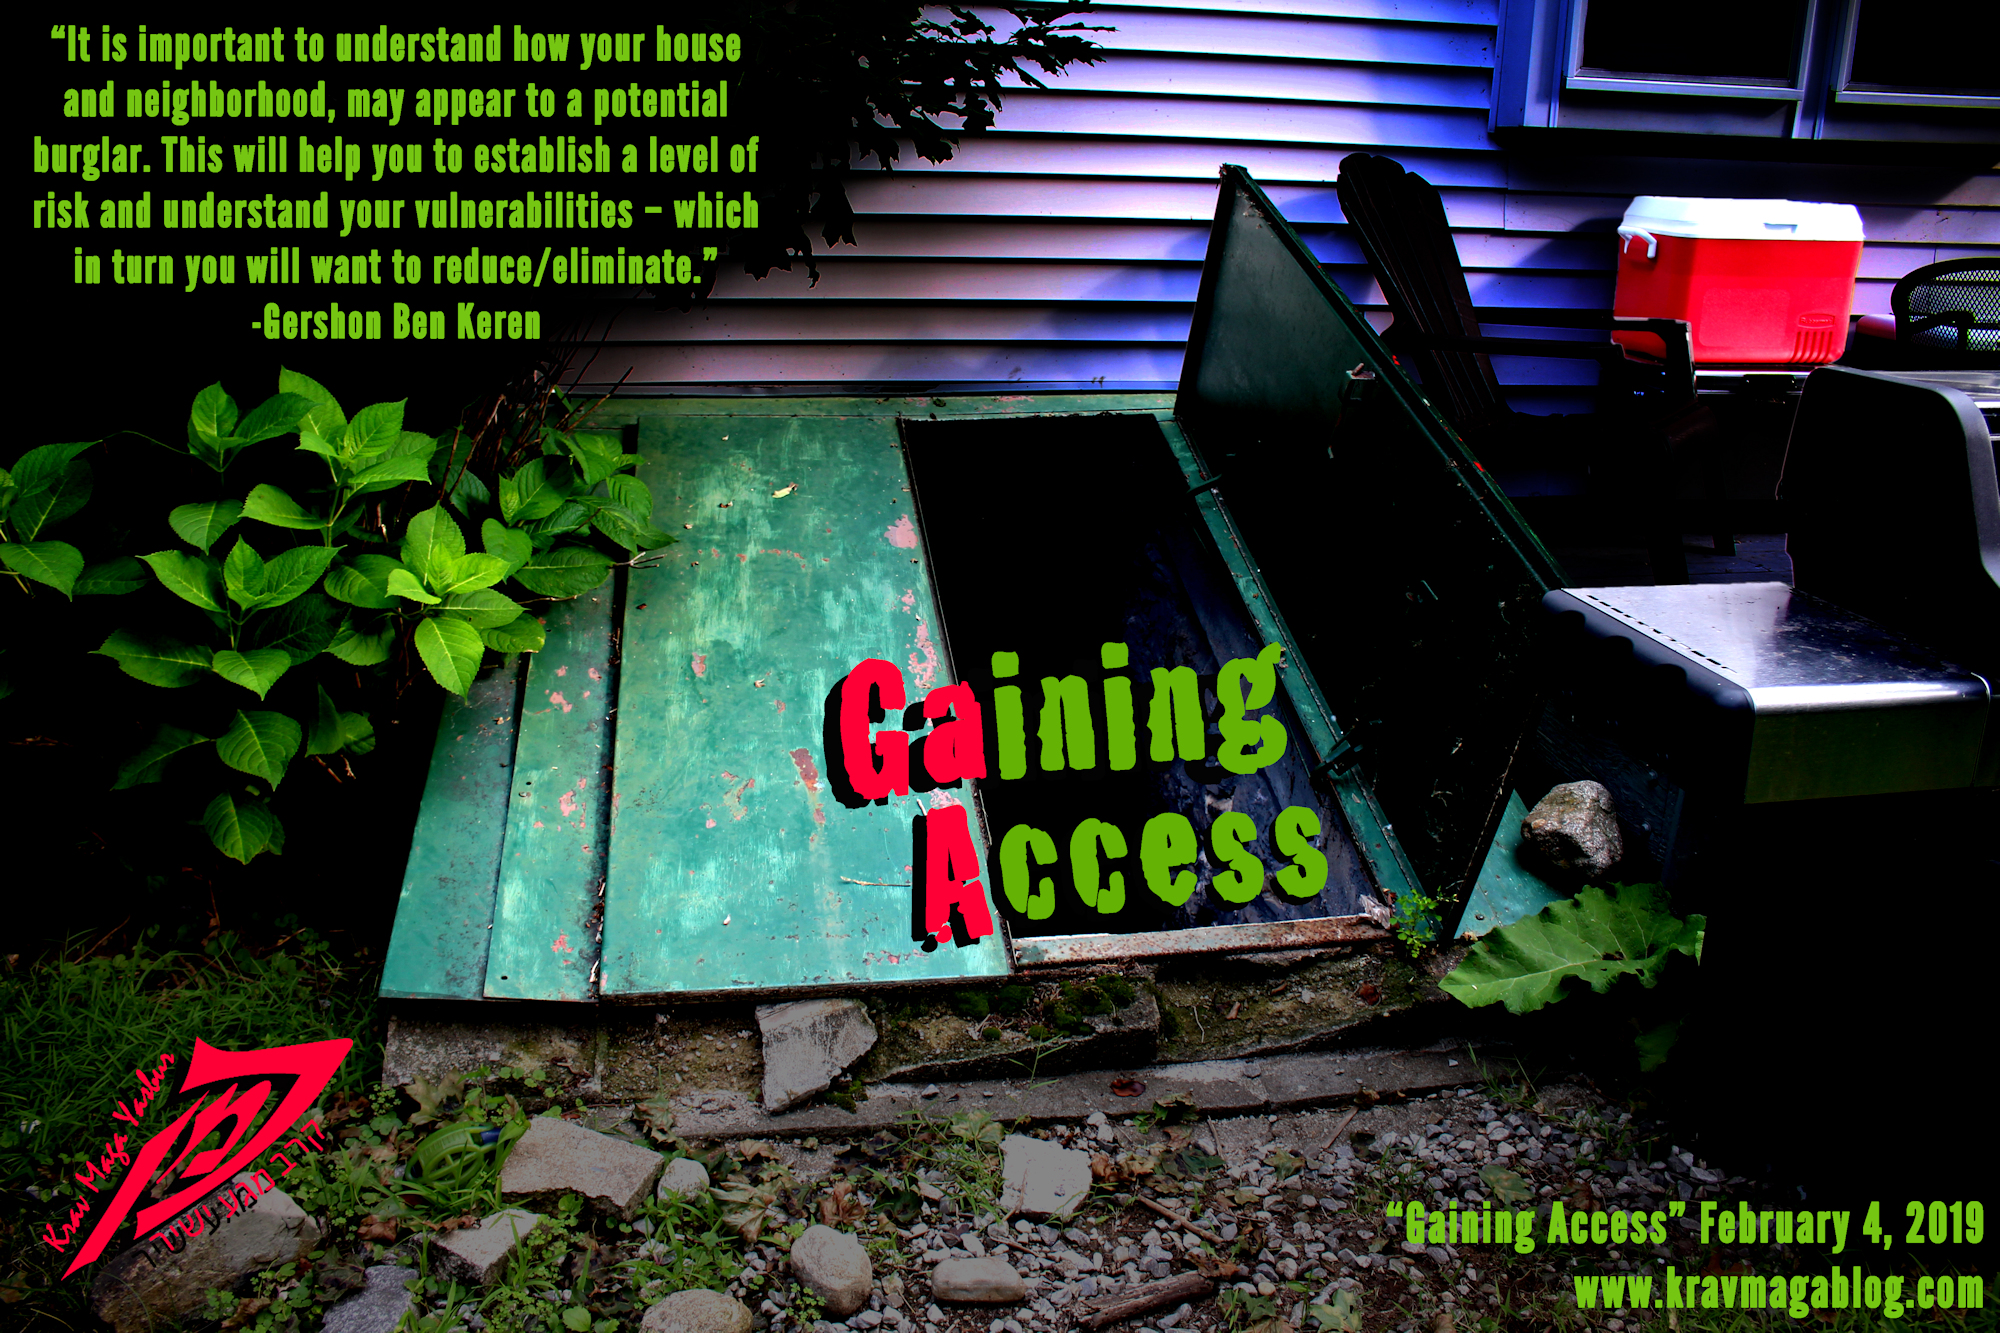 Blog About Gaining Access